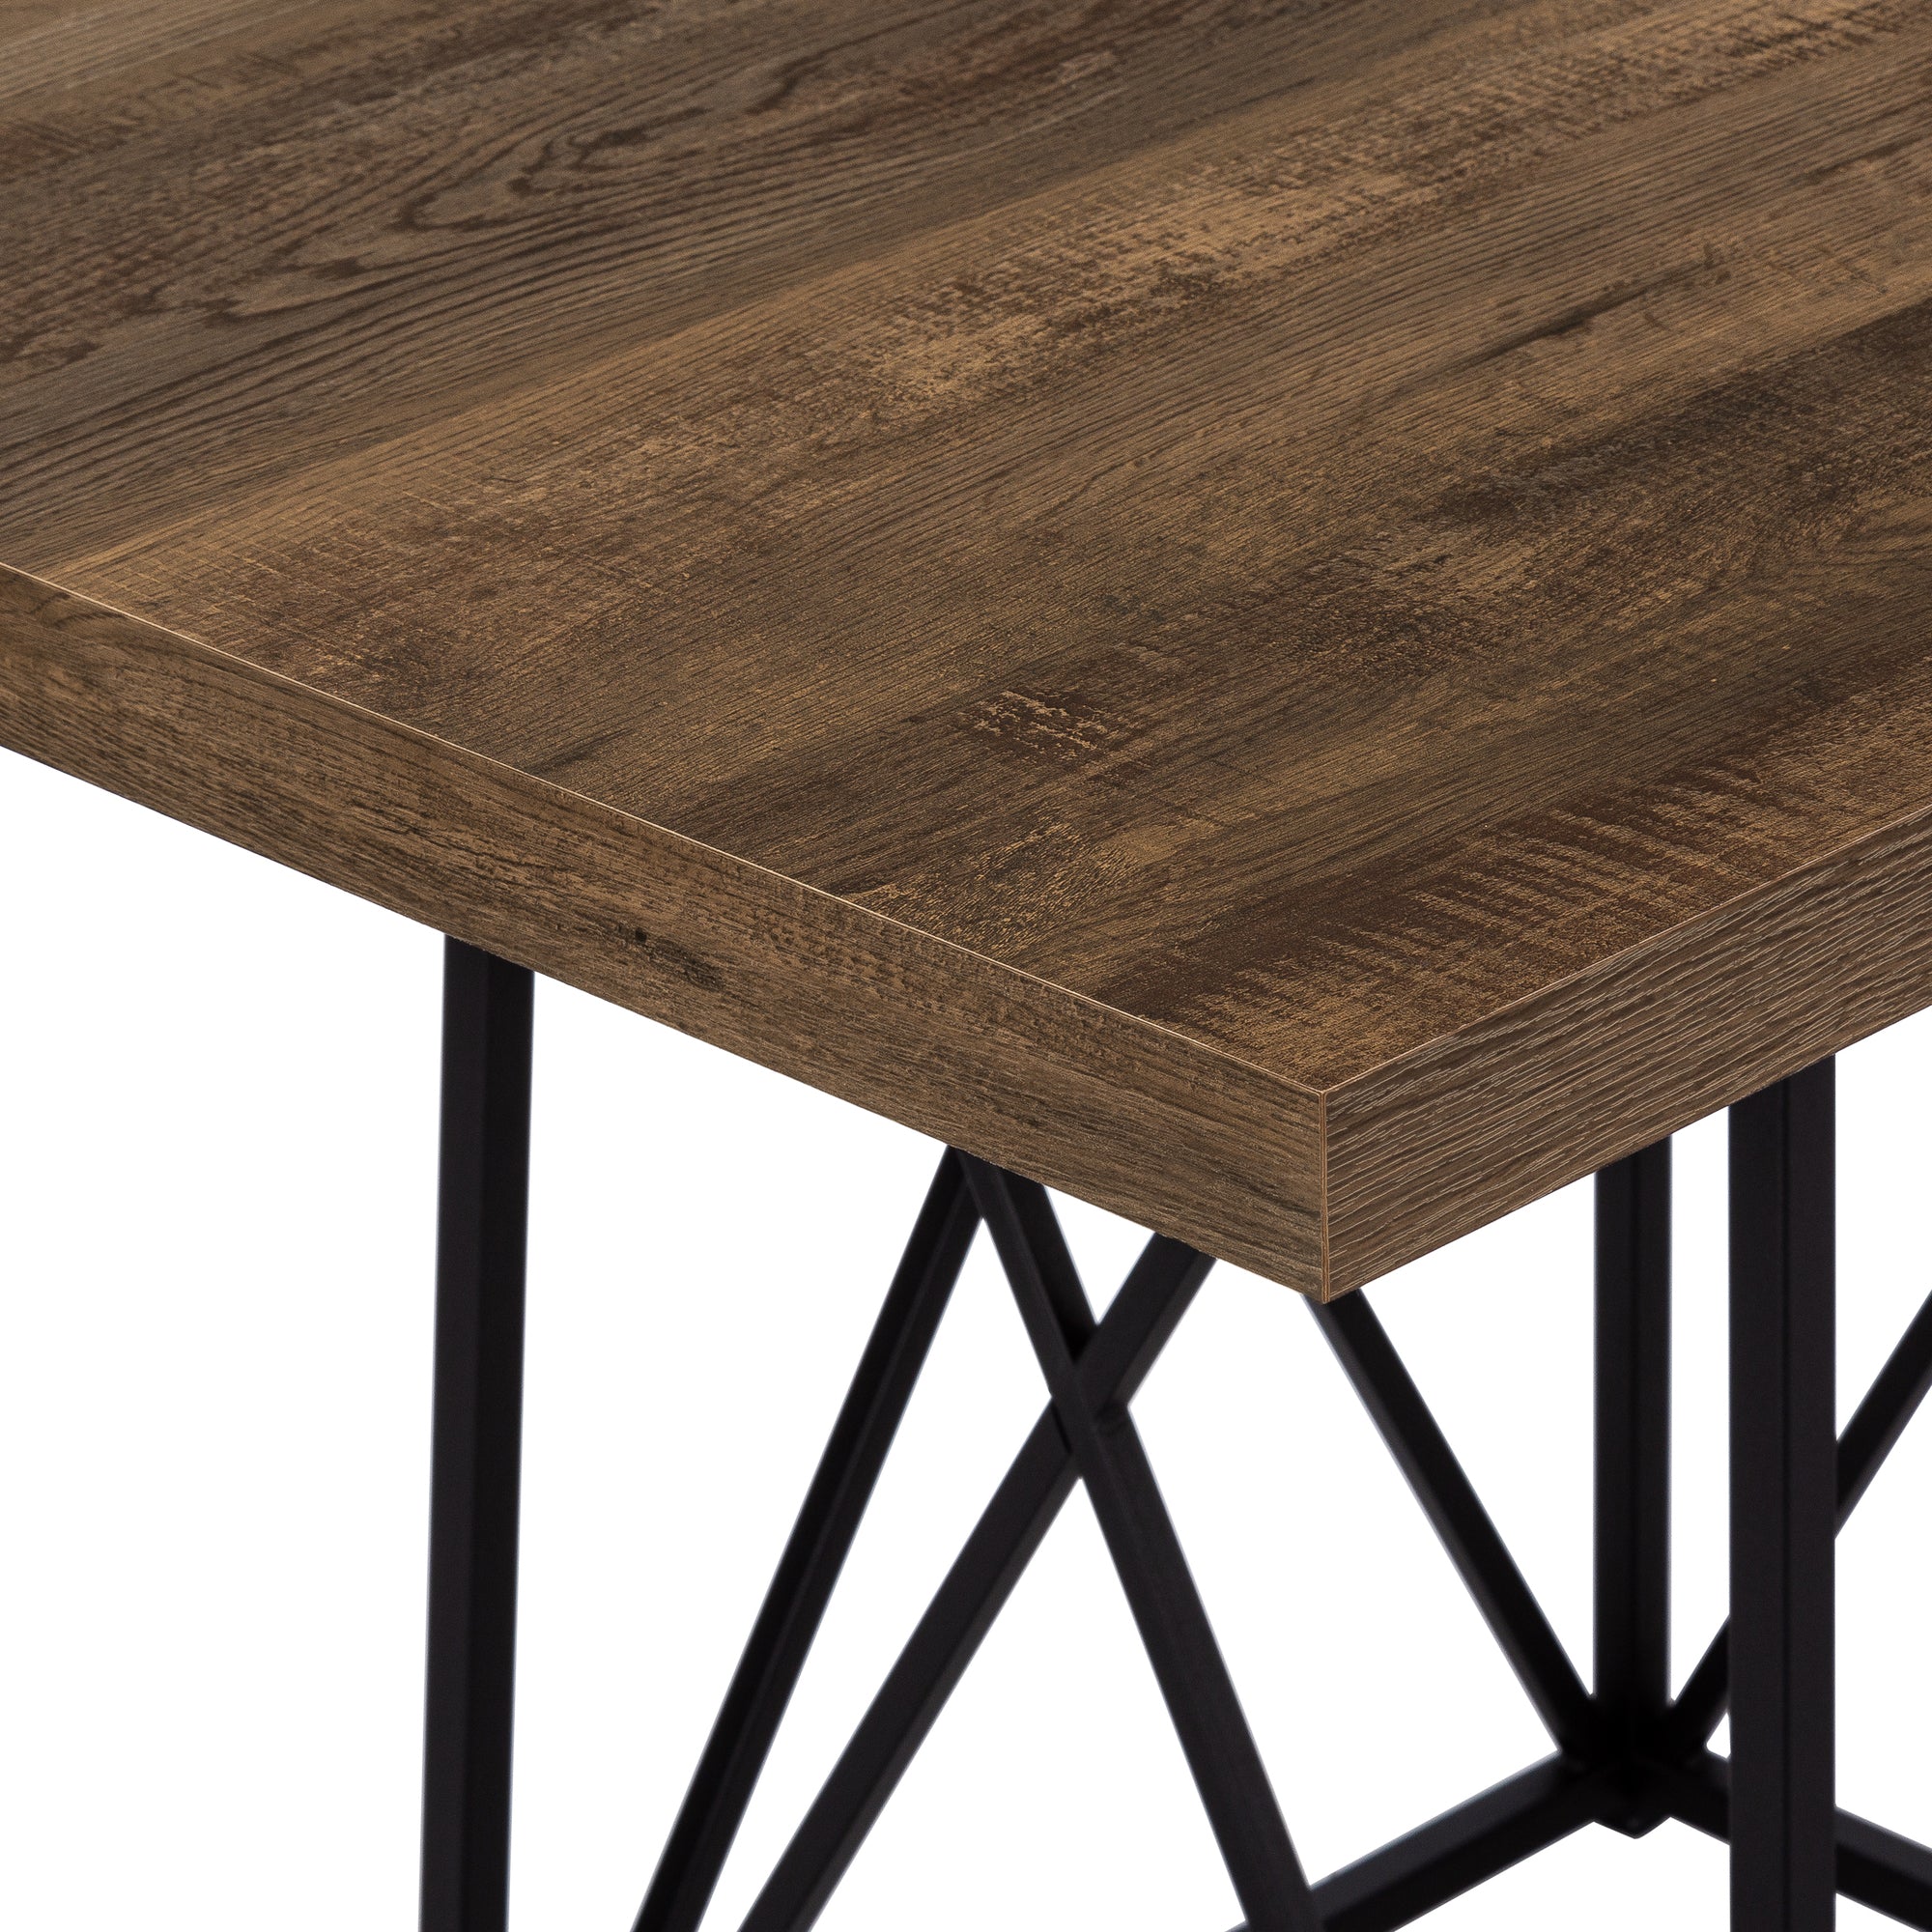 Industrial Style Reclaimed Wood-Look Square Dining Table (Brown)